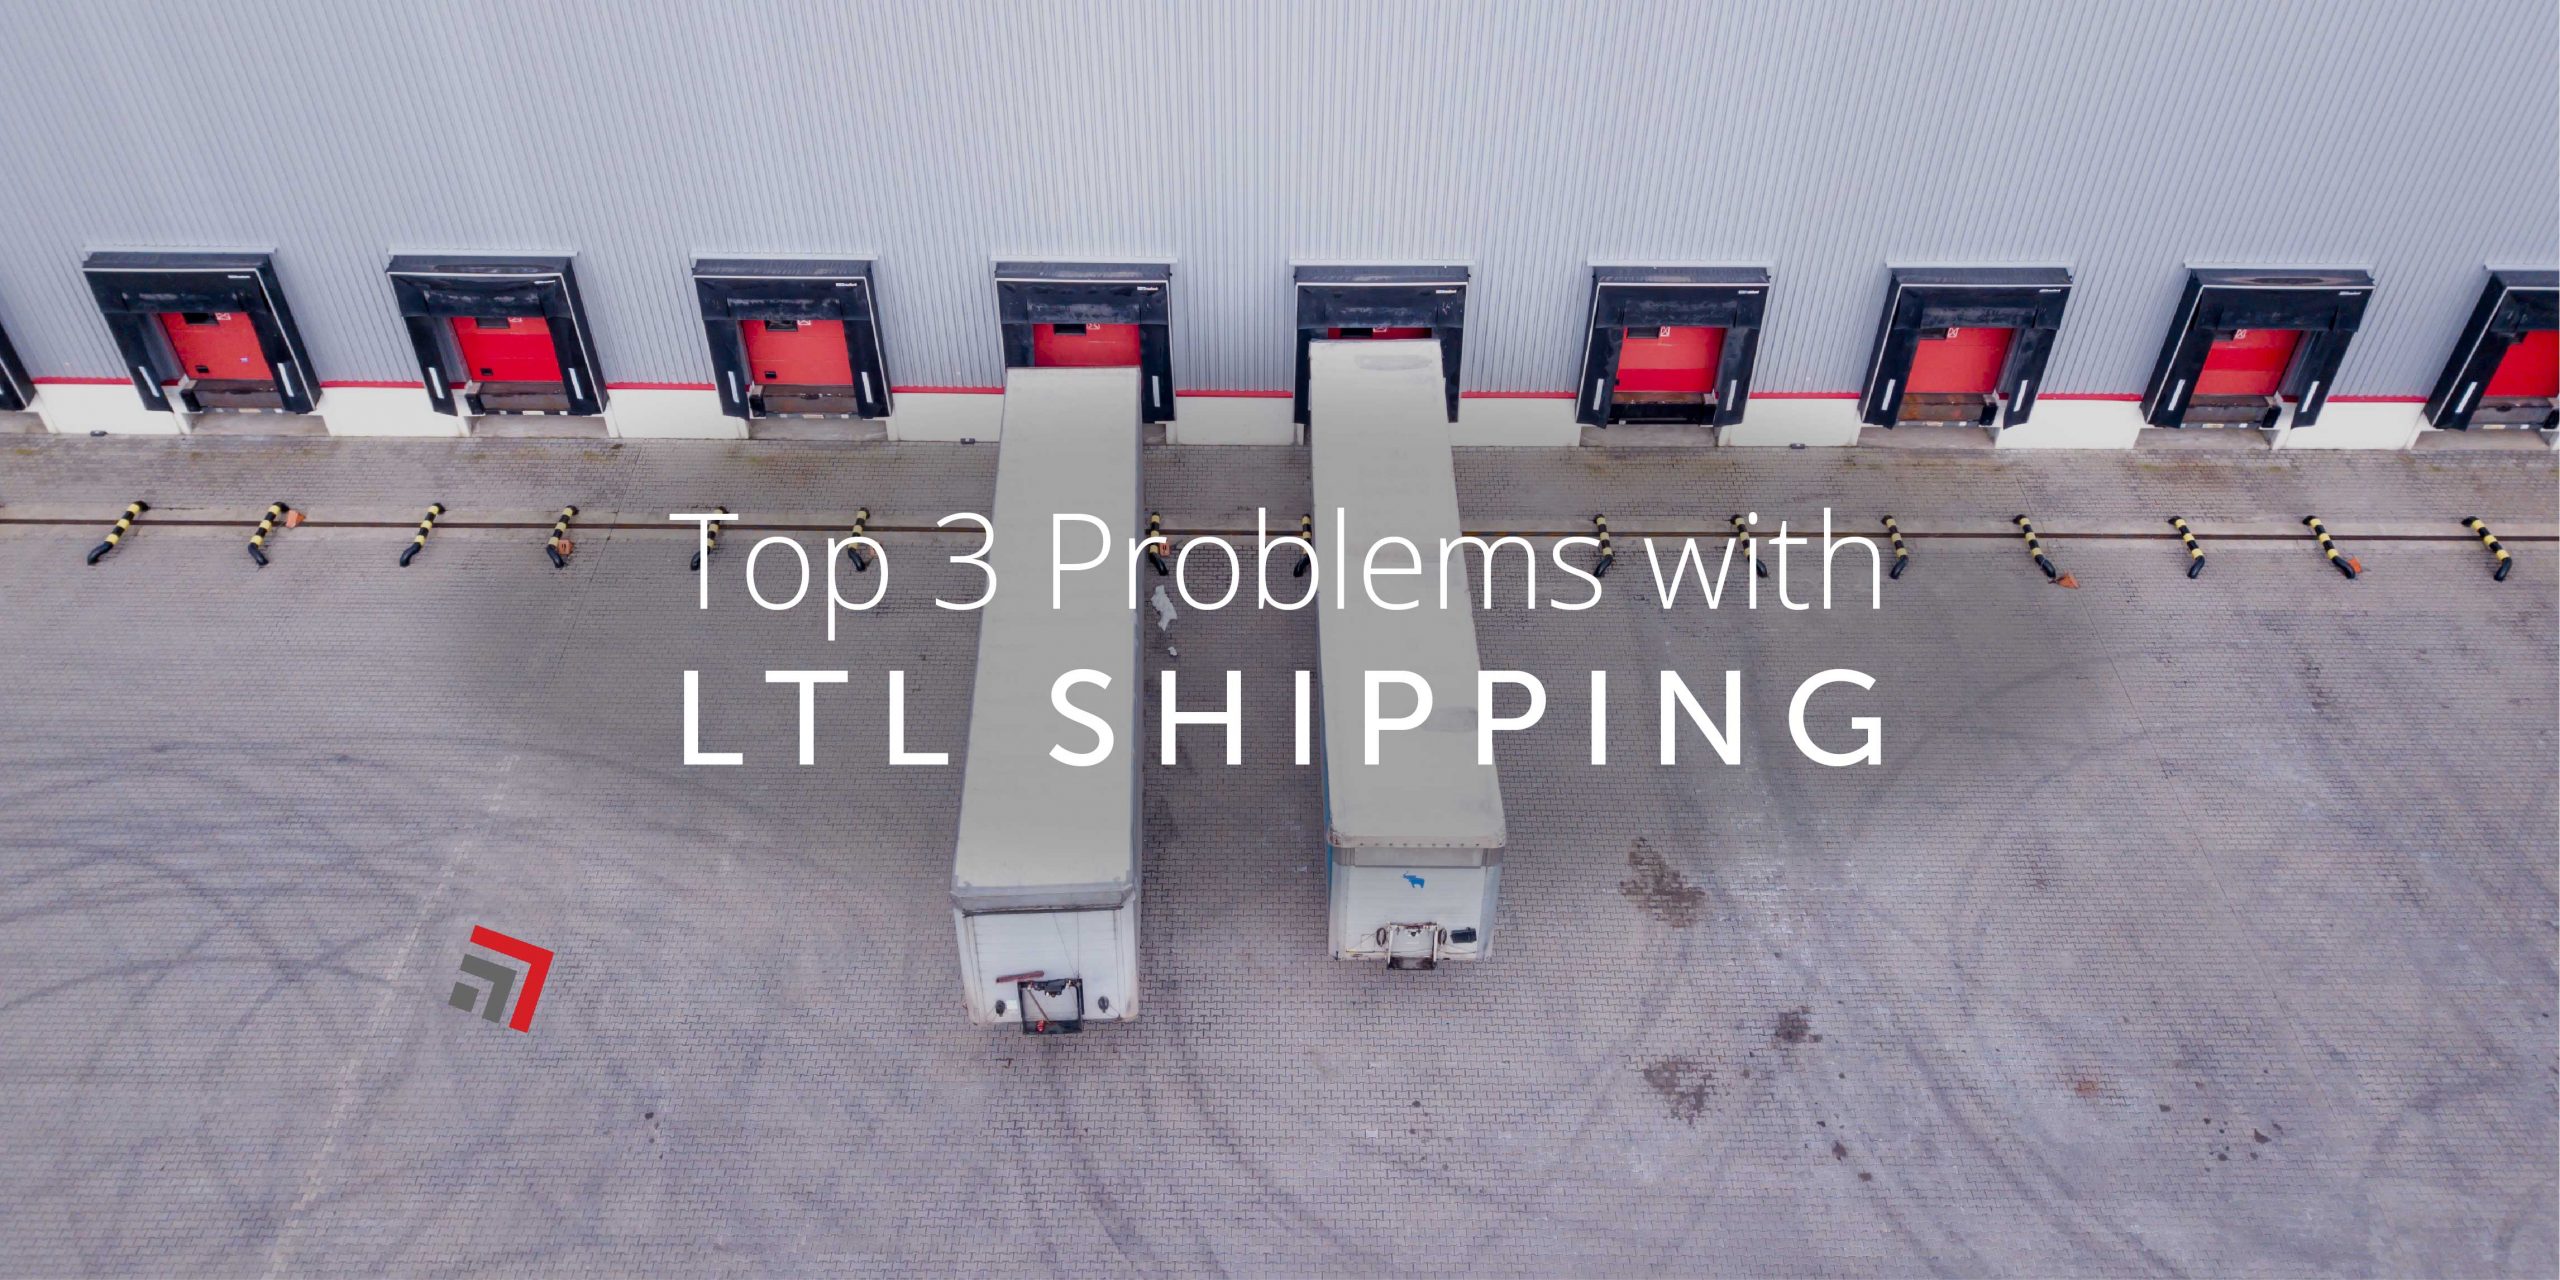 Top 3 Problems with LTL Shipping